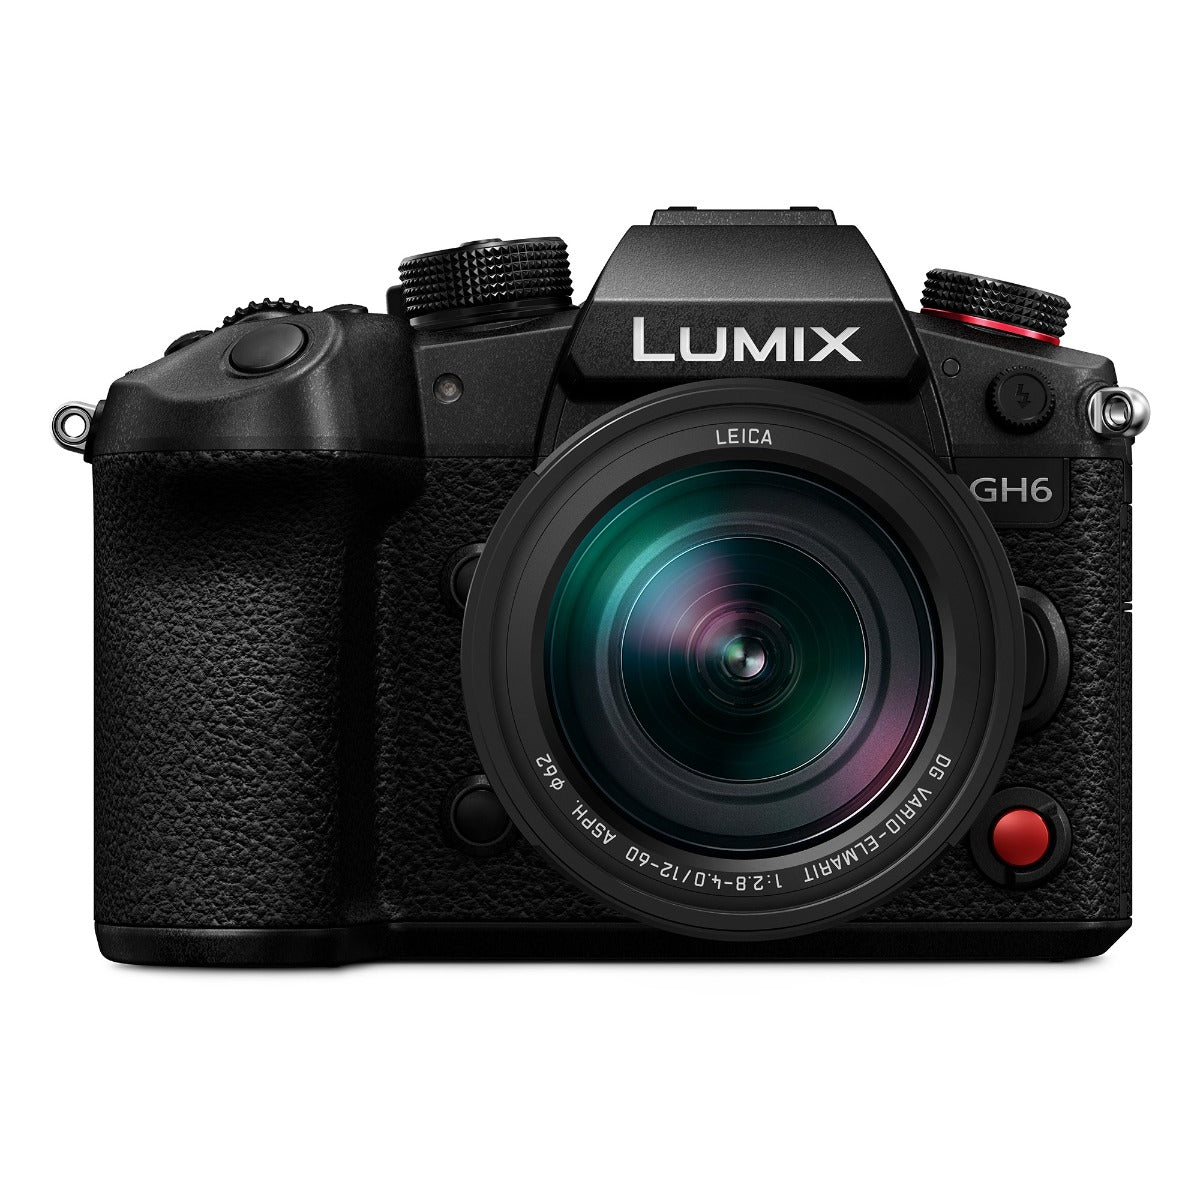 Product Image of Panasonic Lumix GH6 Camera with Leica 12-60mm f2.8-f4 Lens Kit